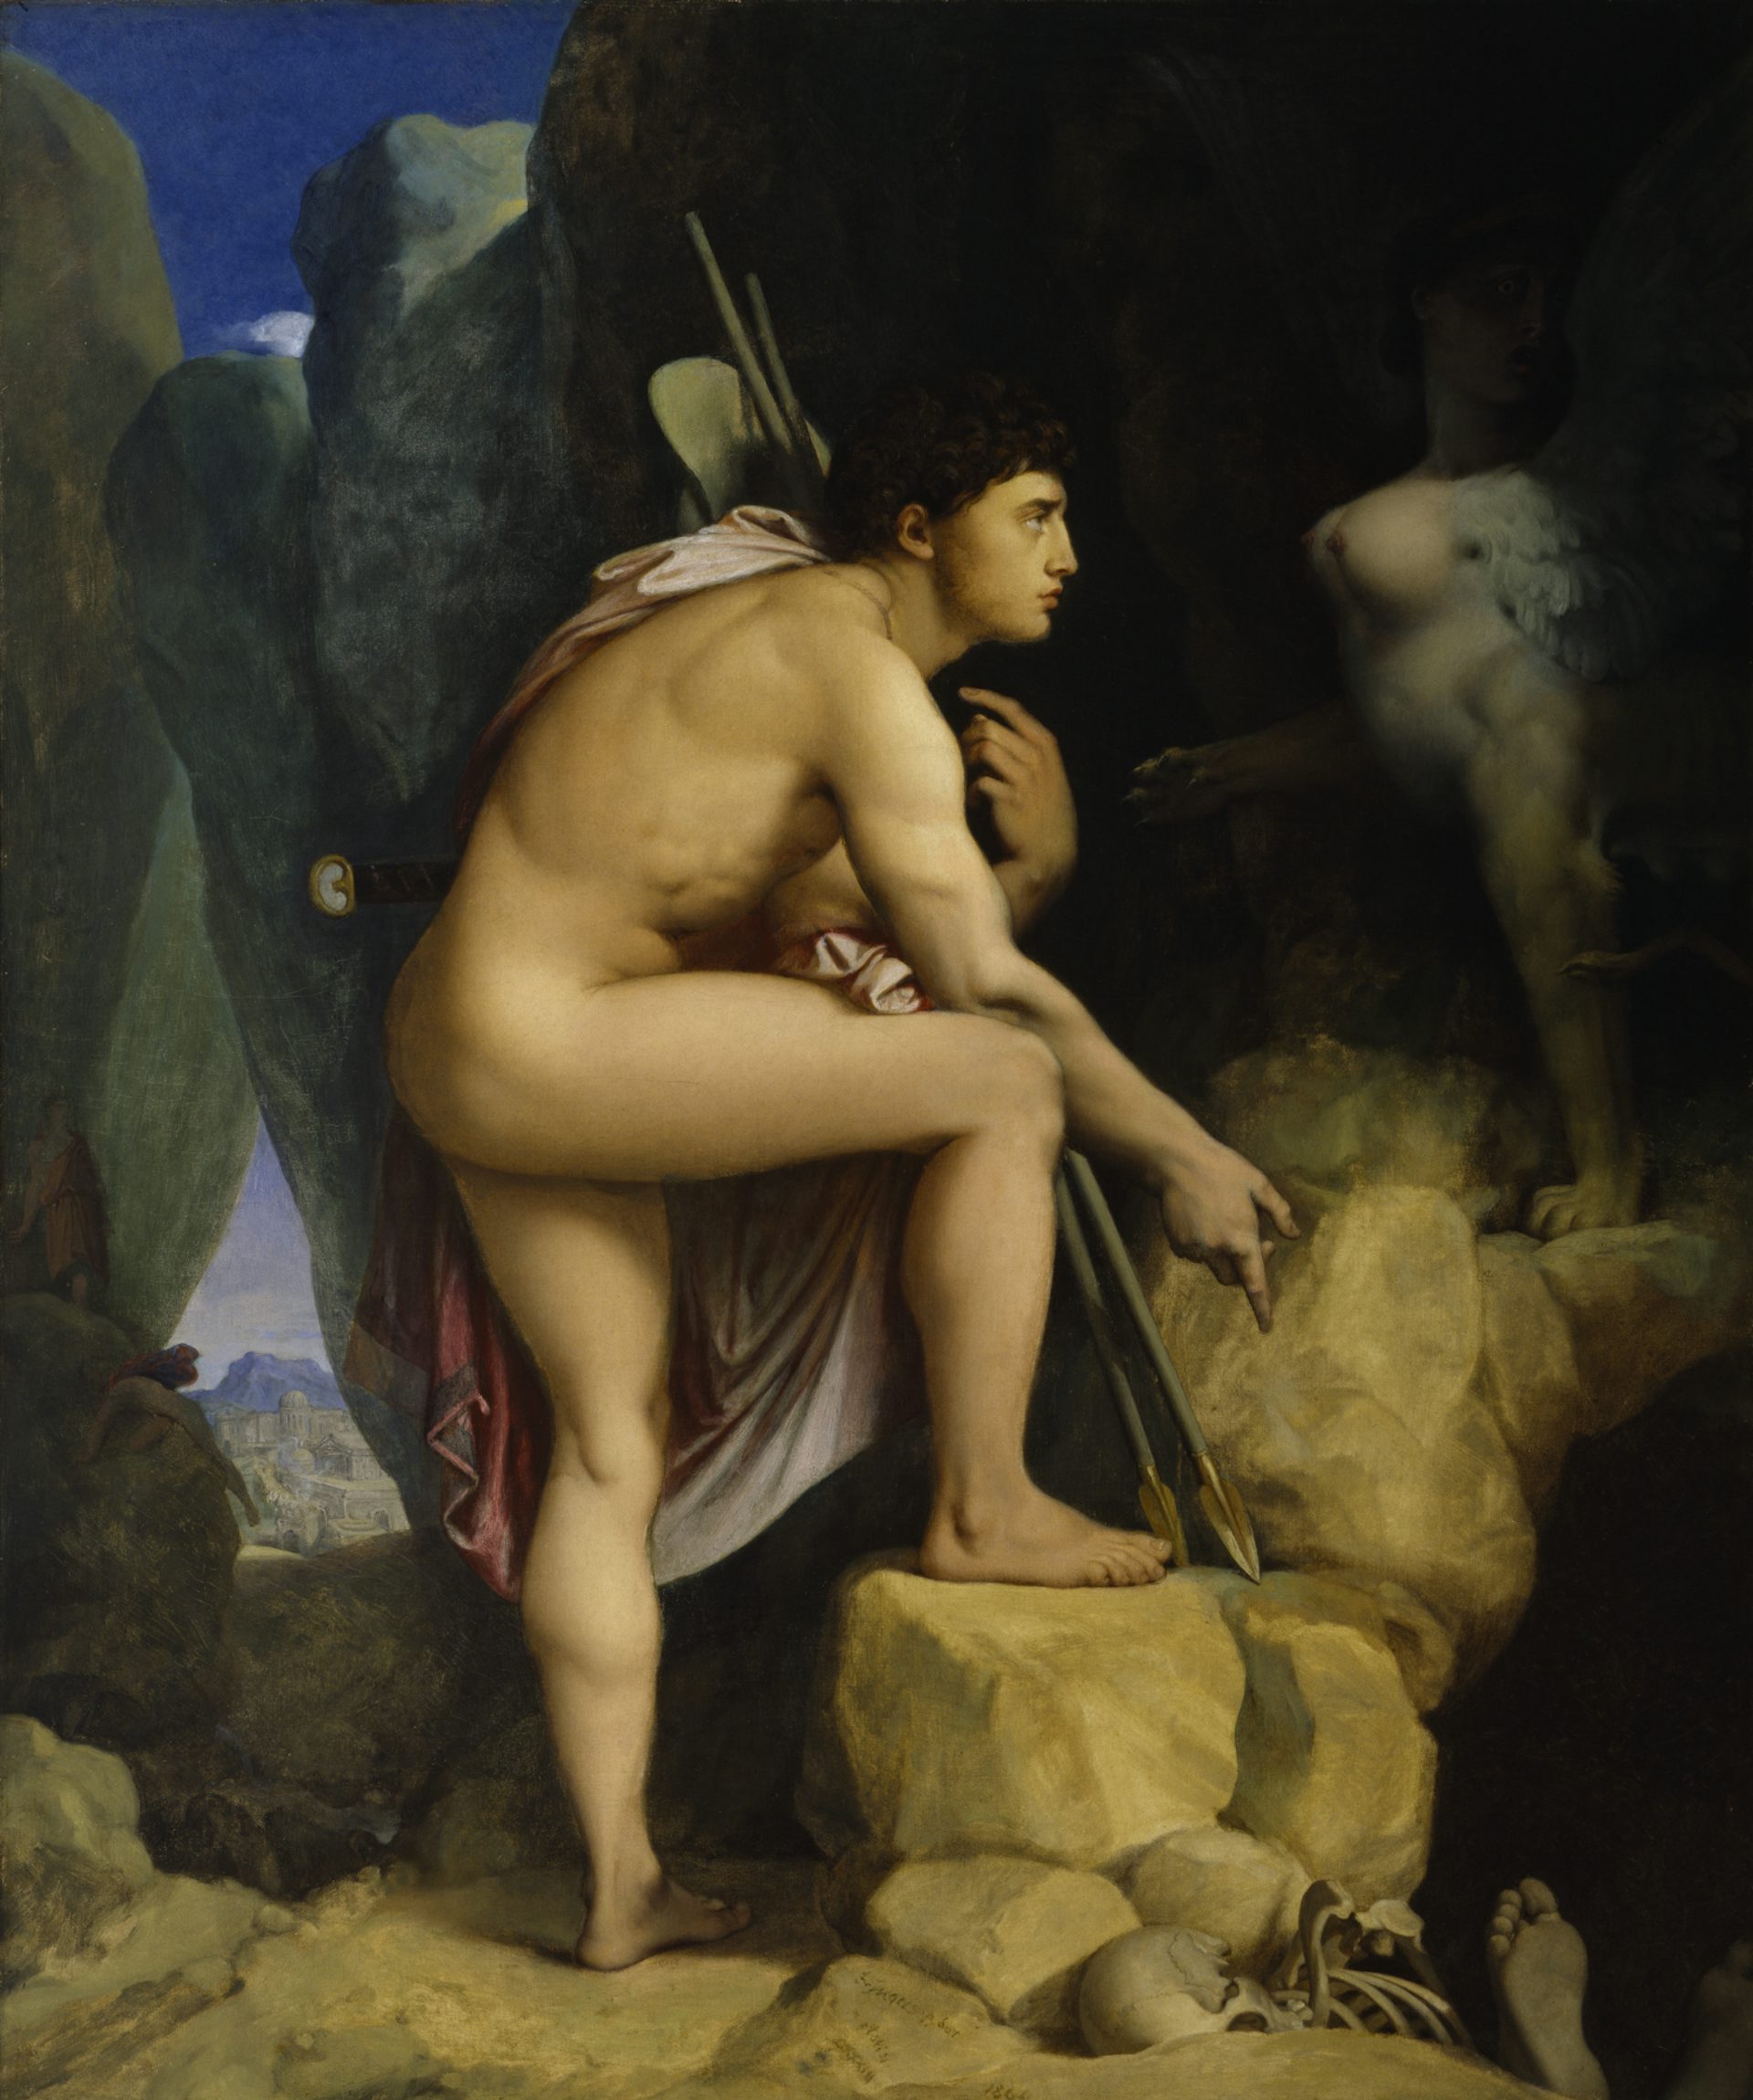 Oedipus and the Sphinx by Jean-Auguste-Dominique Ingres